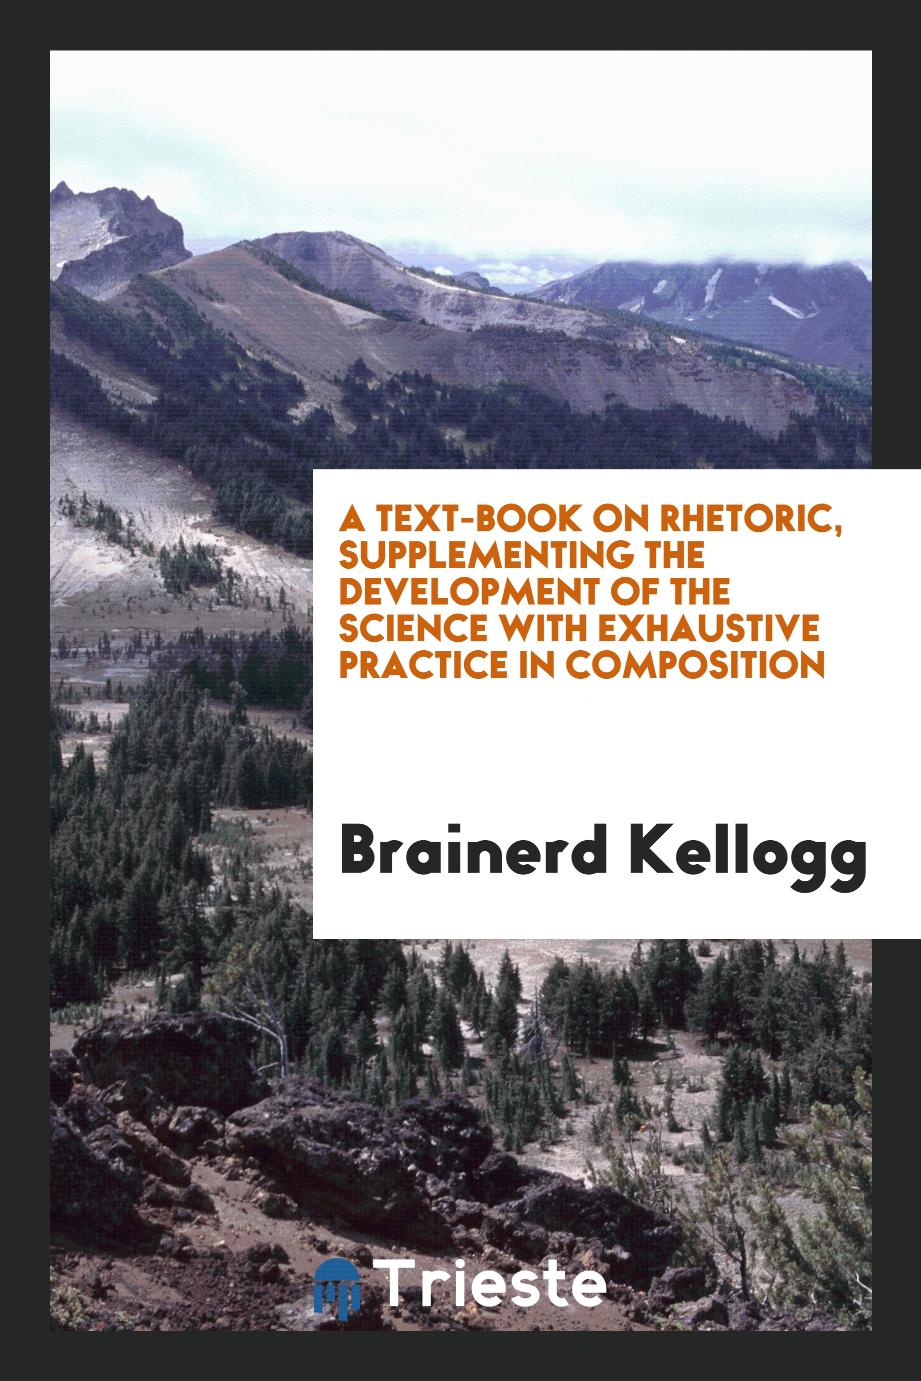 A Text-Book on Rhetoric, Supplementing the Development of the Science with Exhaustive Practice in Composition